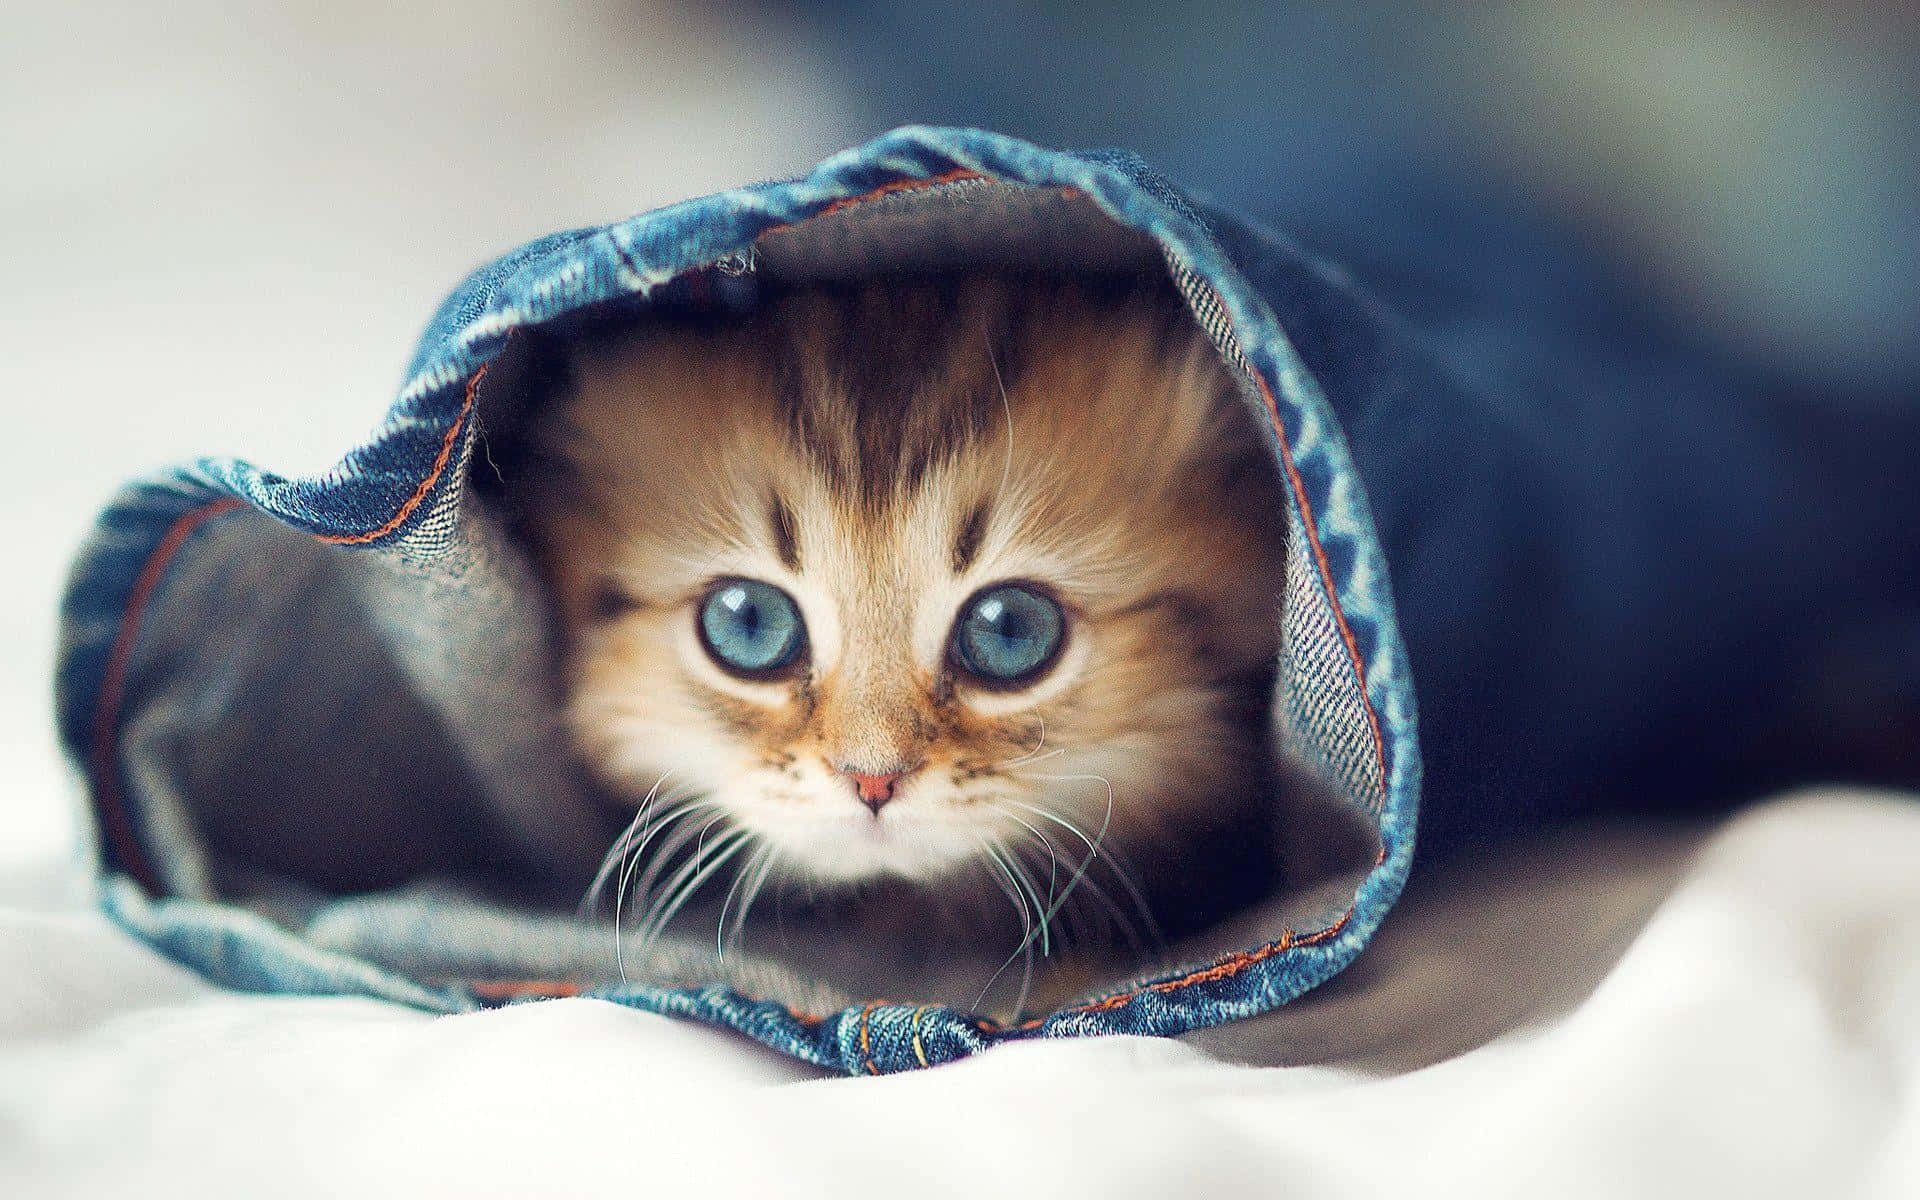 A Kitten Peeking Out Of A Pair Of Jeans